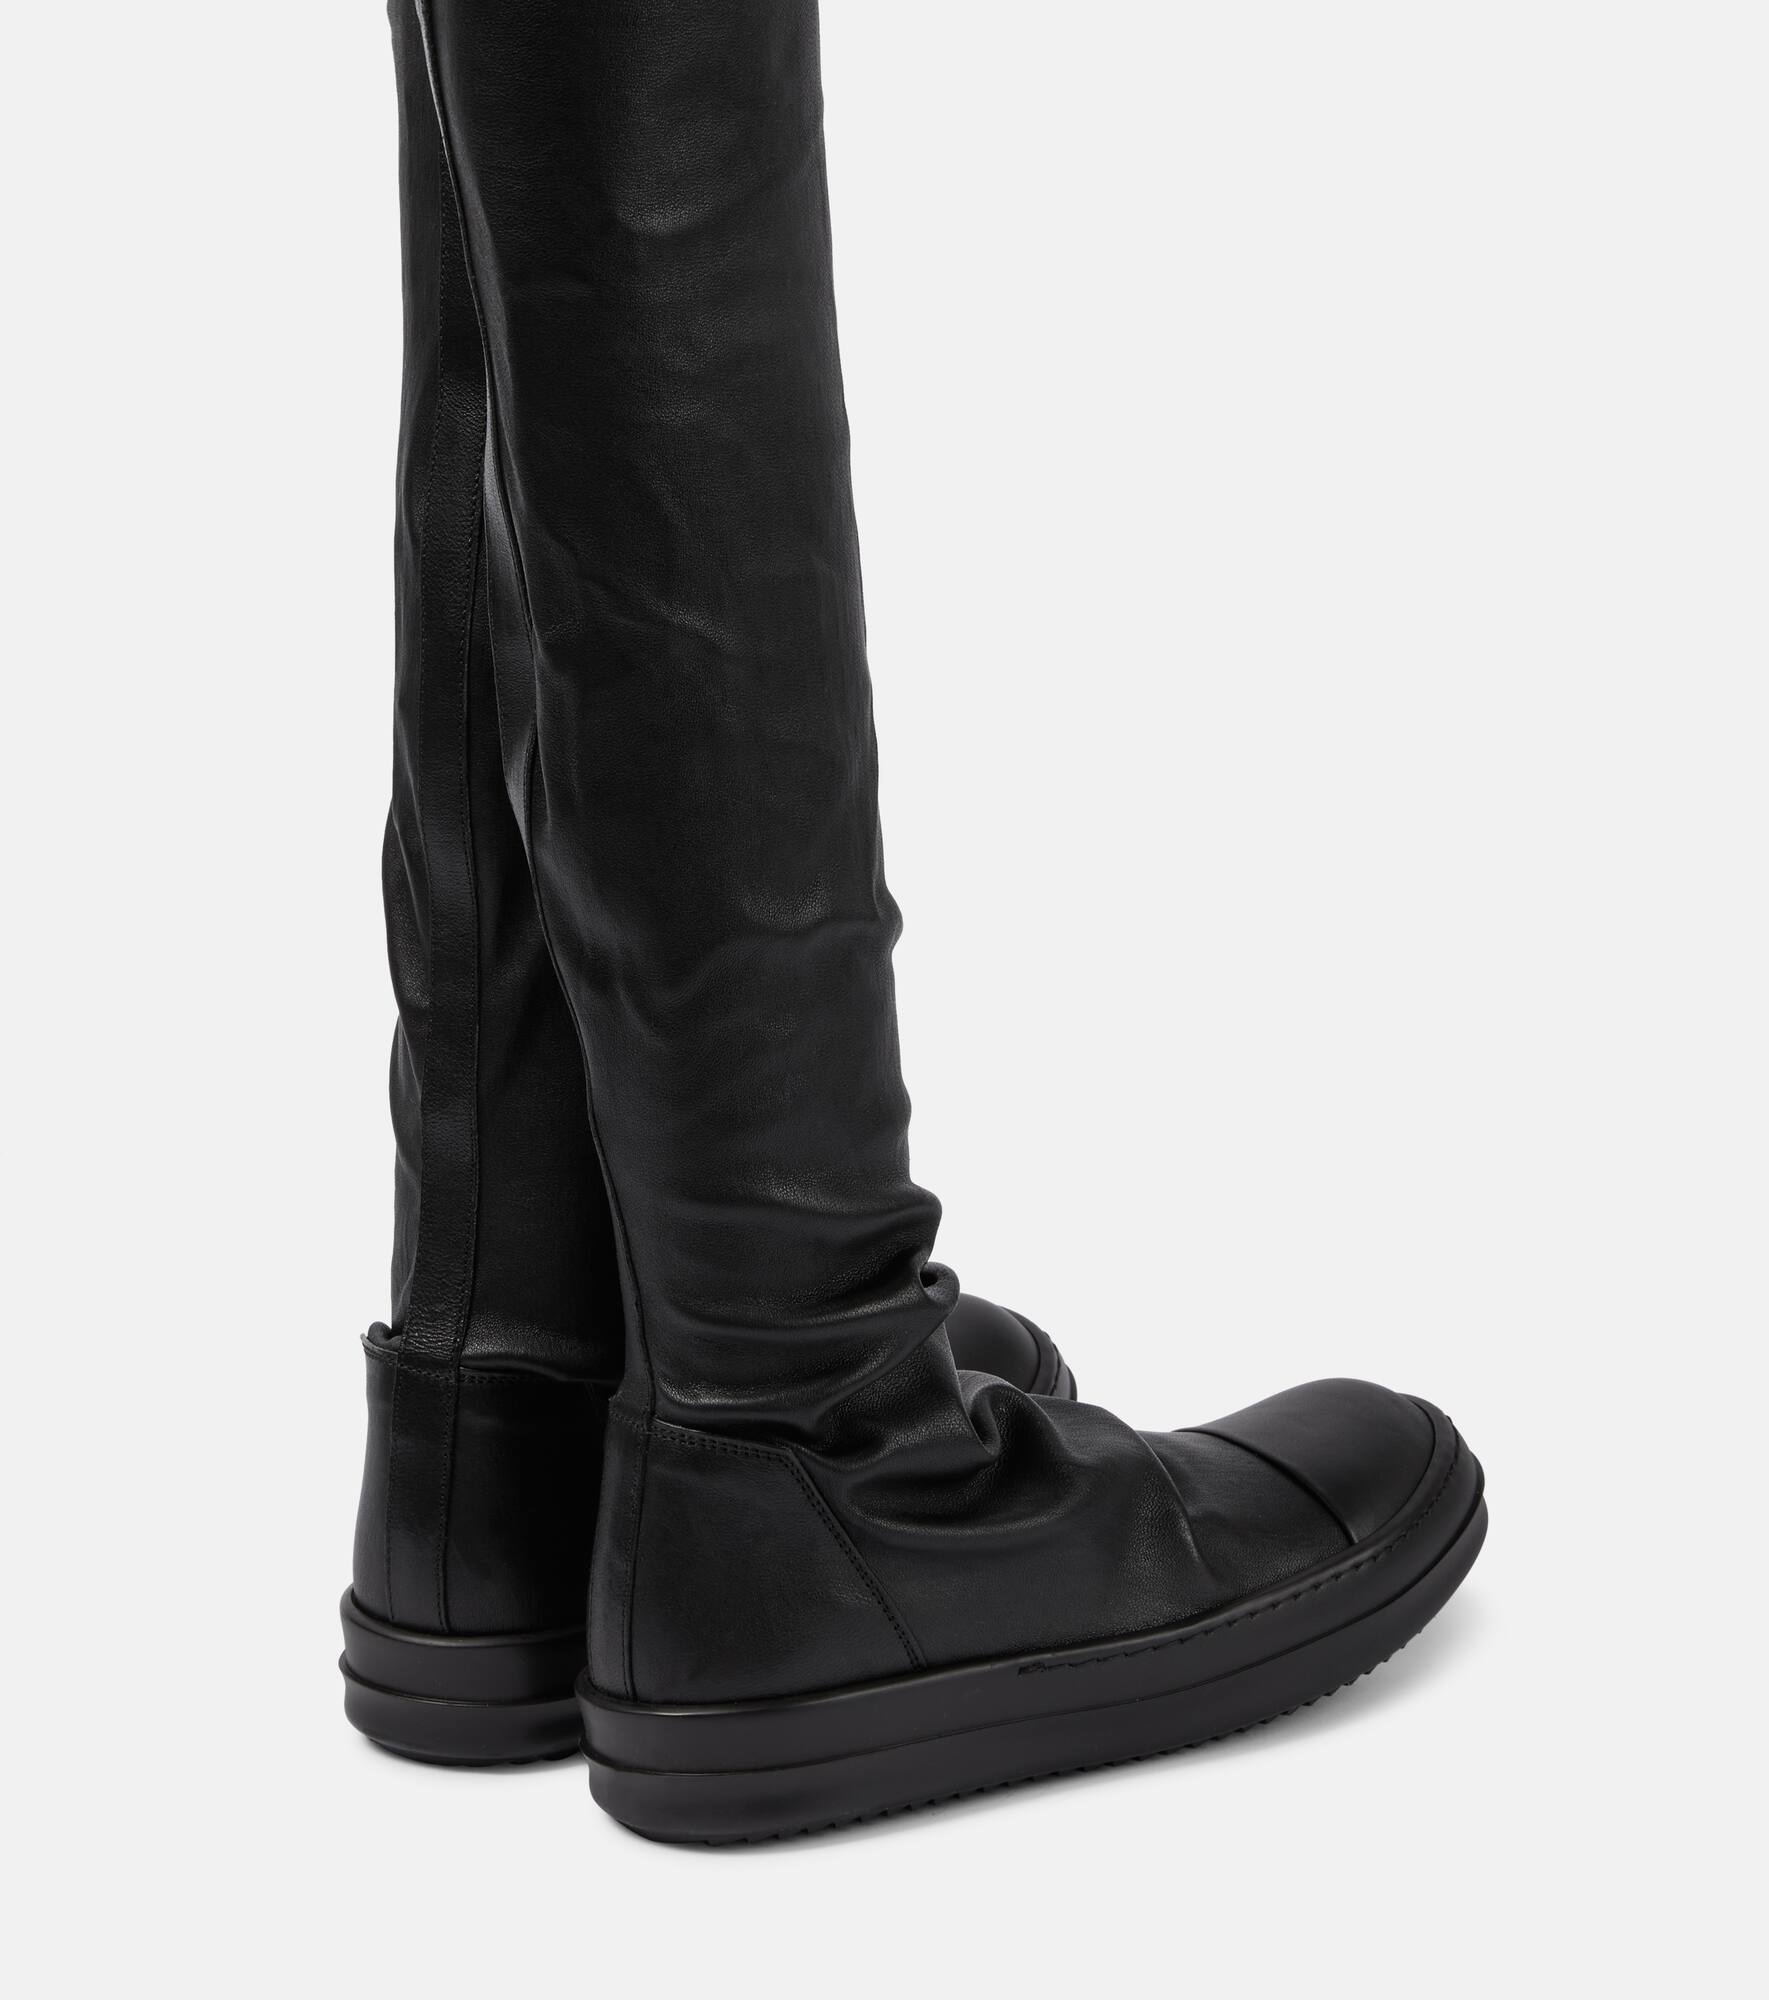 Stocking Sneaks knee-high leather sneakers - 3